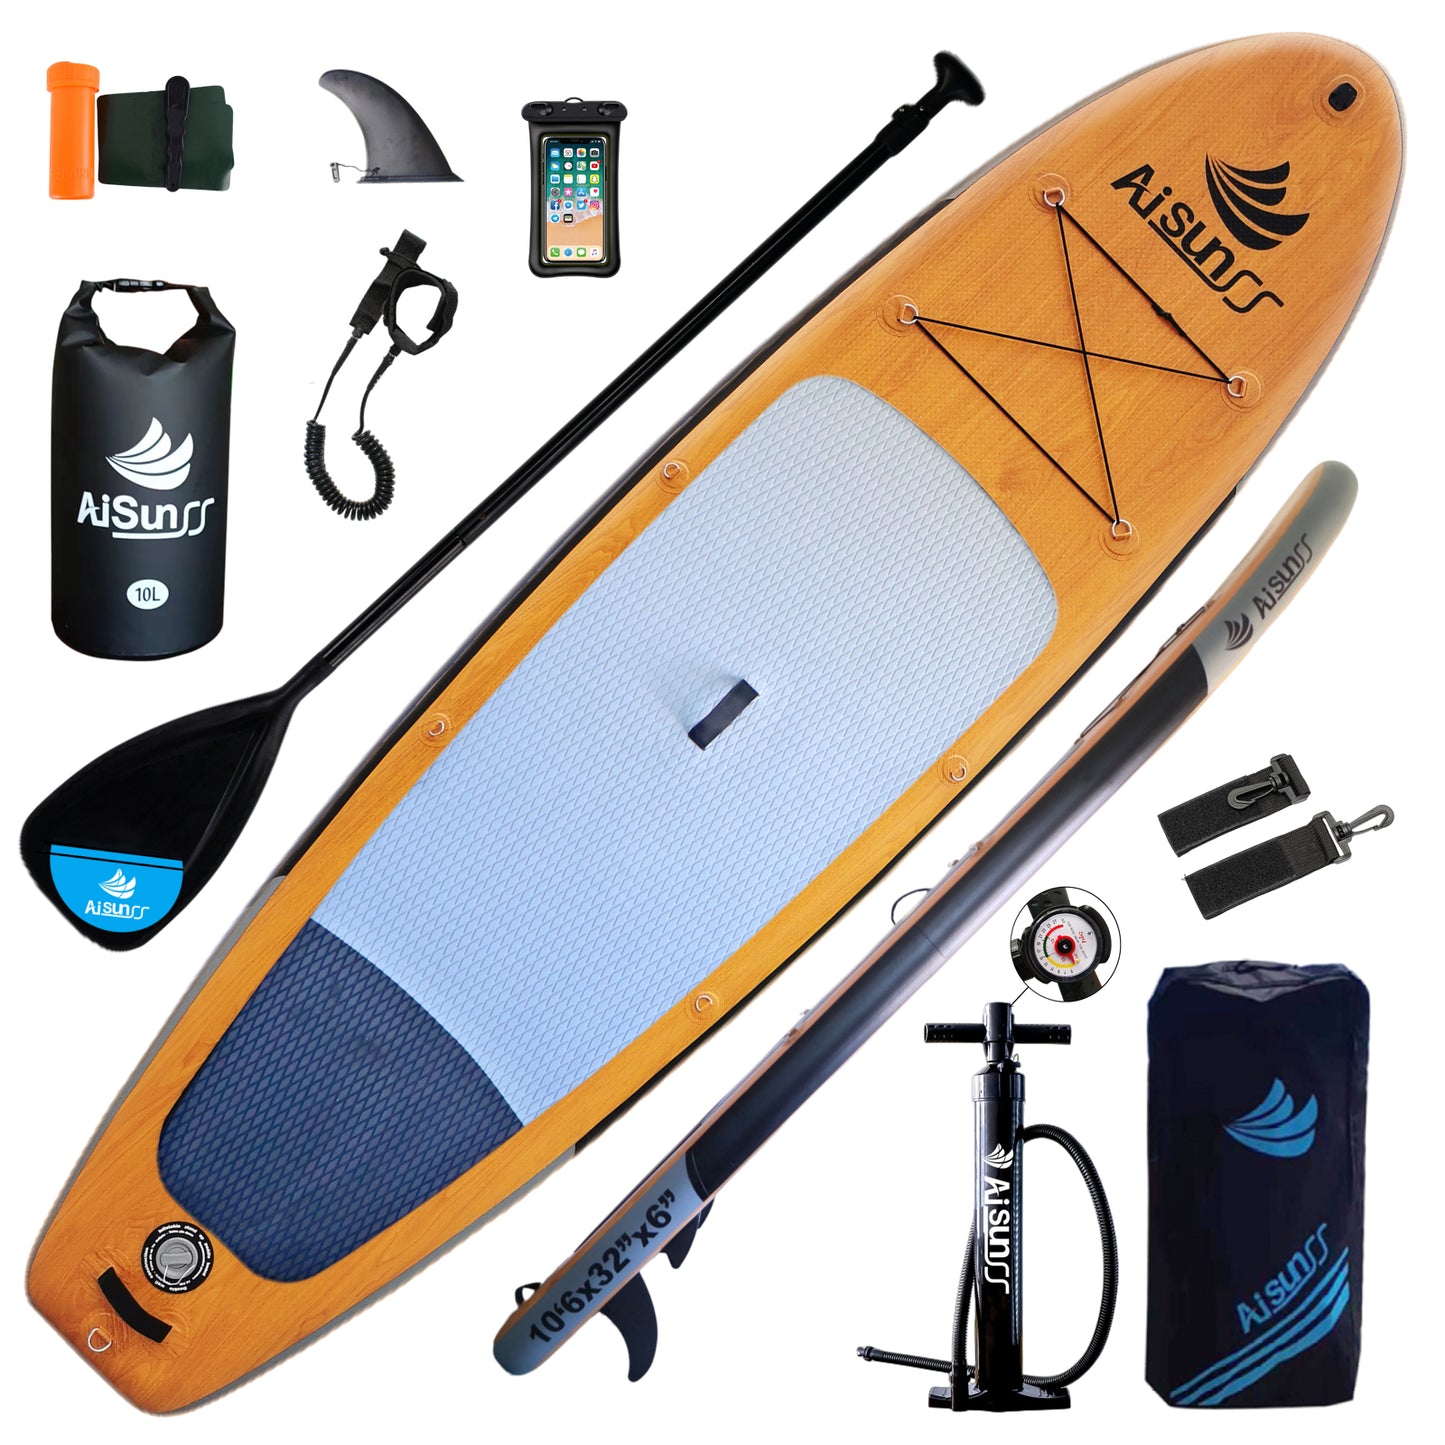 AISUNSS Inflatable Paddle Board - Wooden SUP